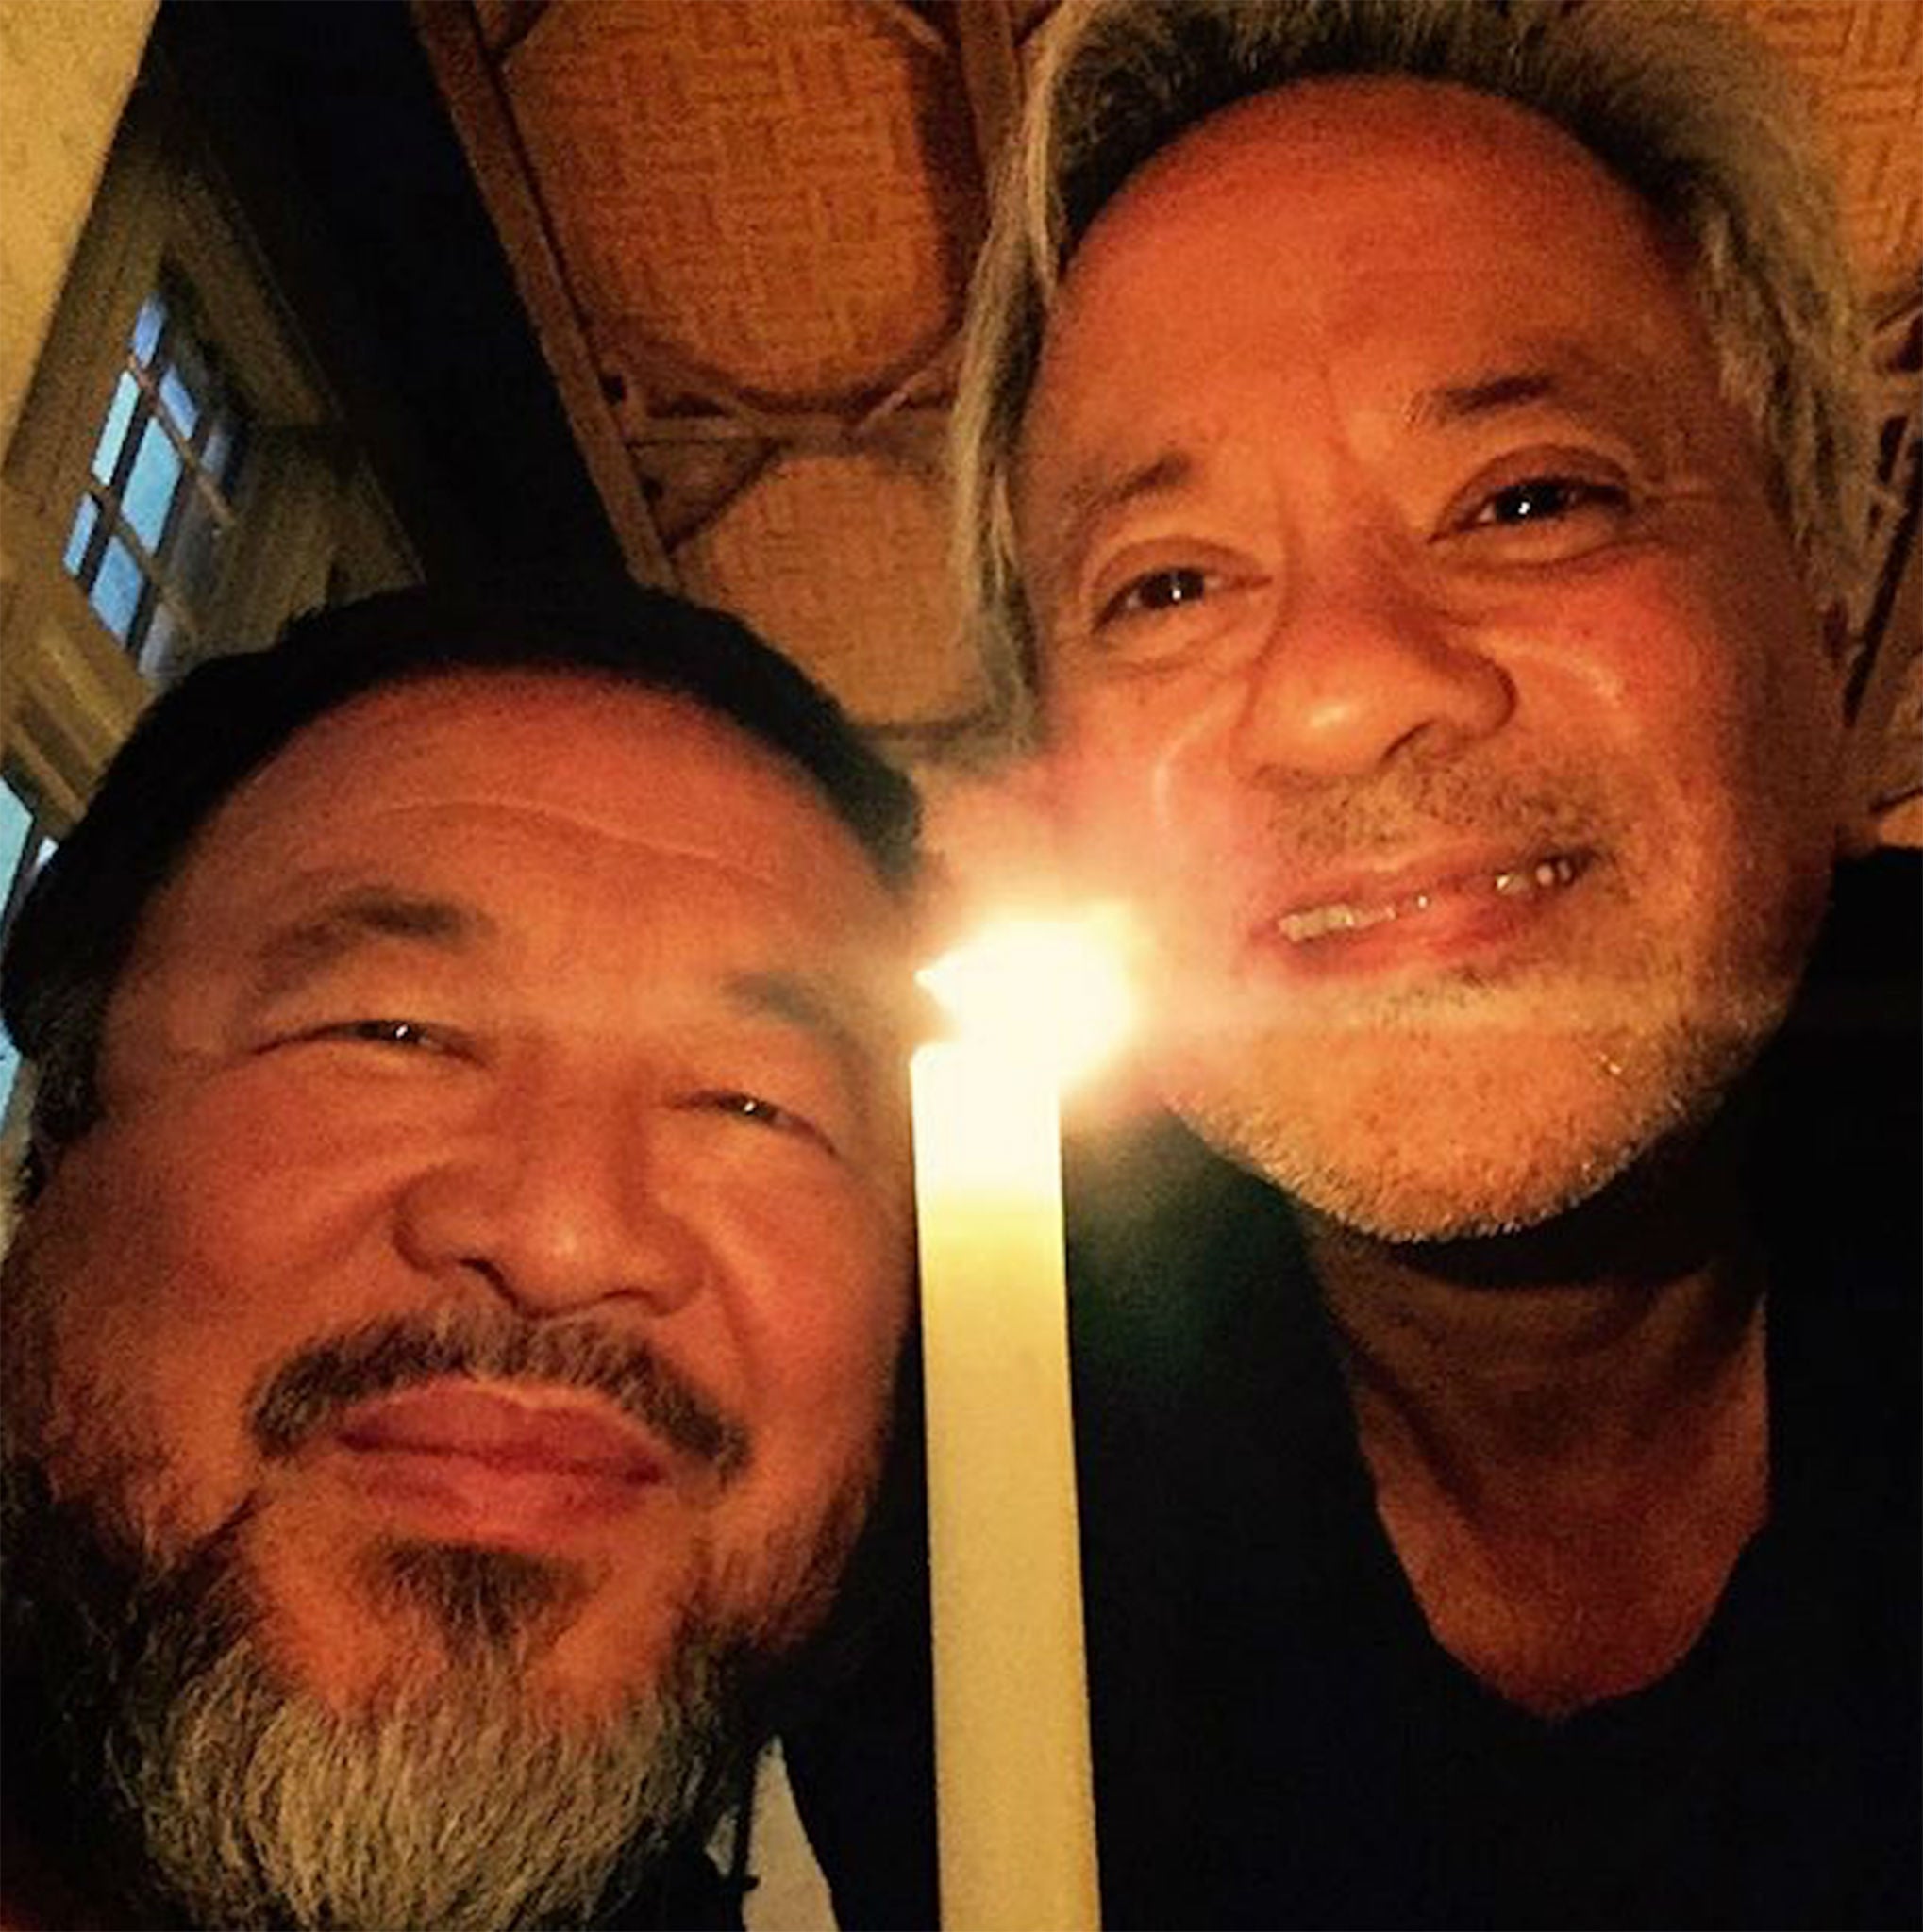 Ai Weiwei and Anish Kapoor will walk together in London to mark the refugee crisis